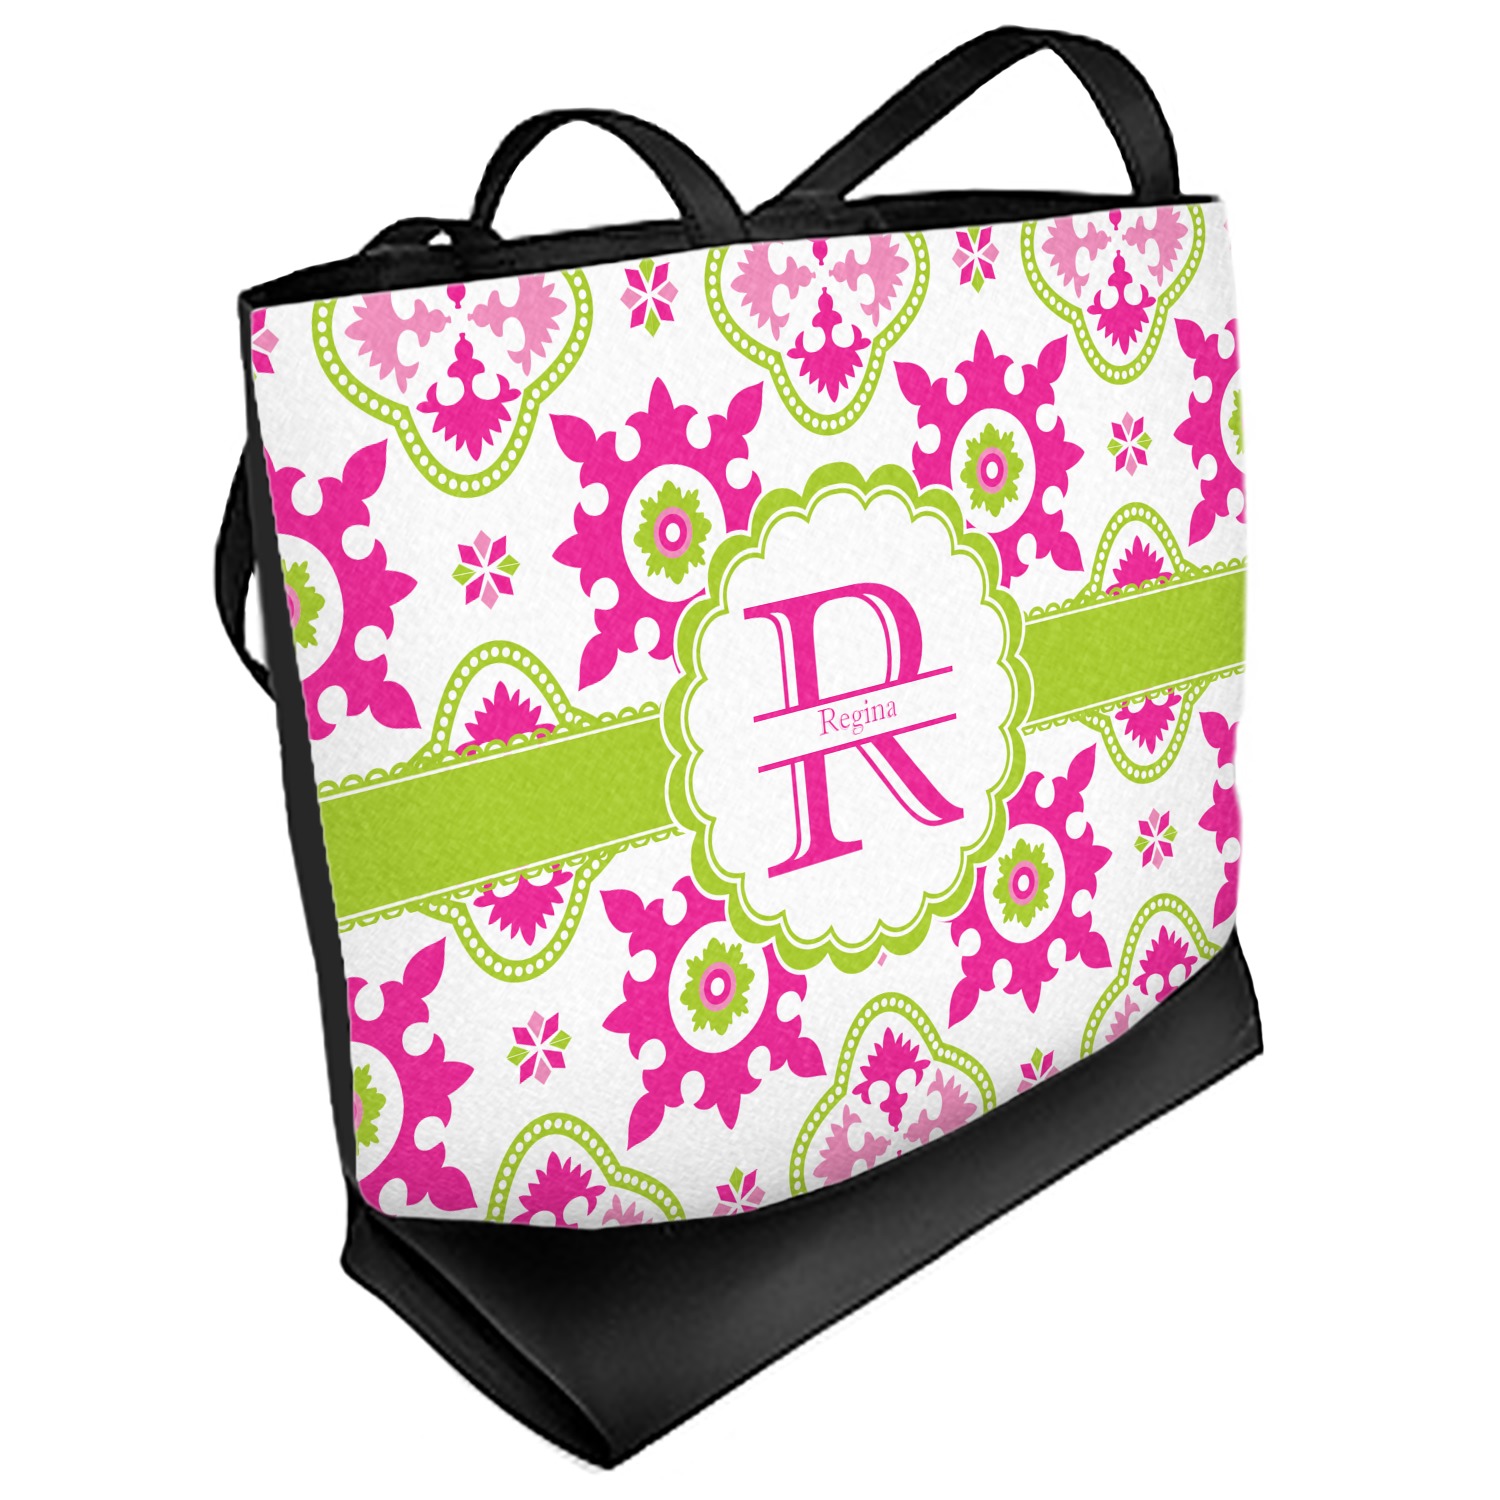 Suzani Floral Beach Tote Bag (Personalized) - YouCustomizeIt